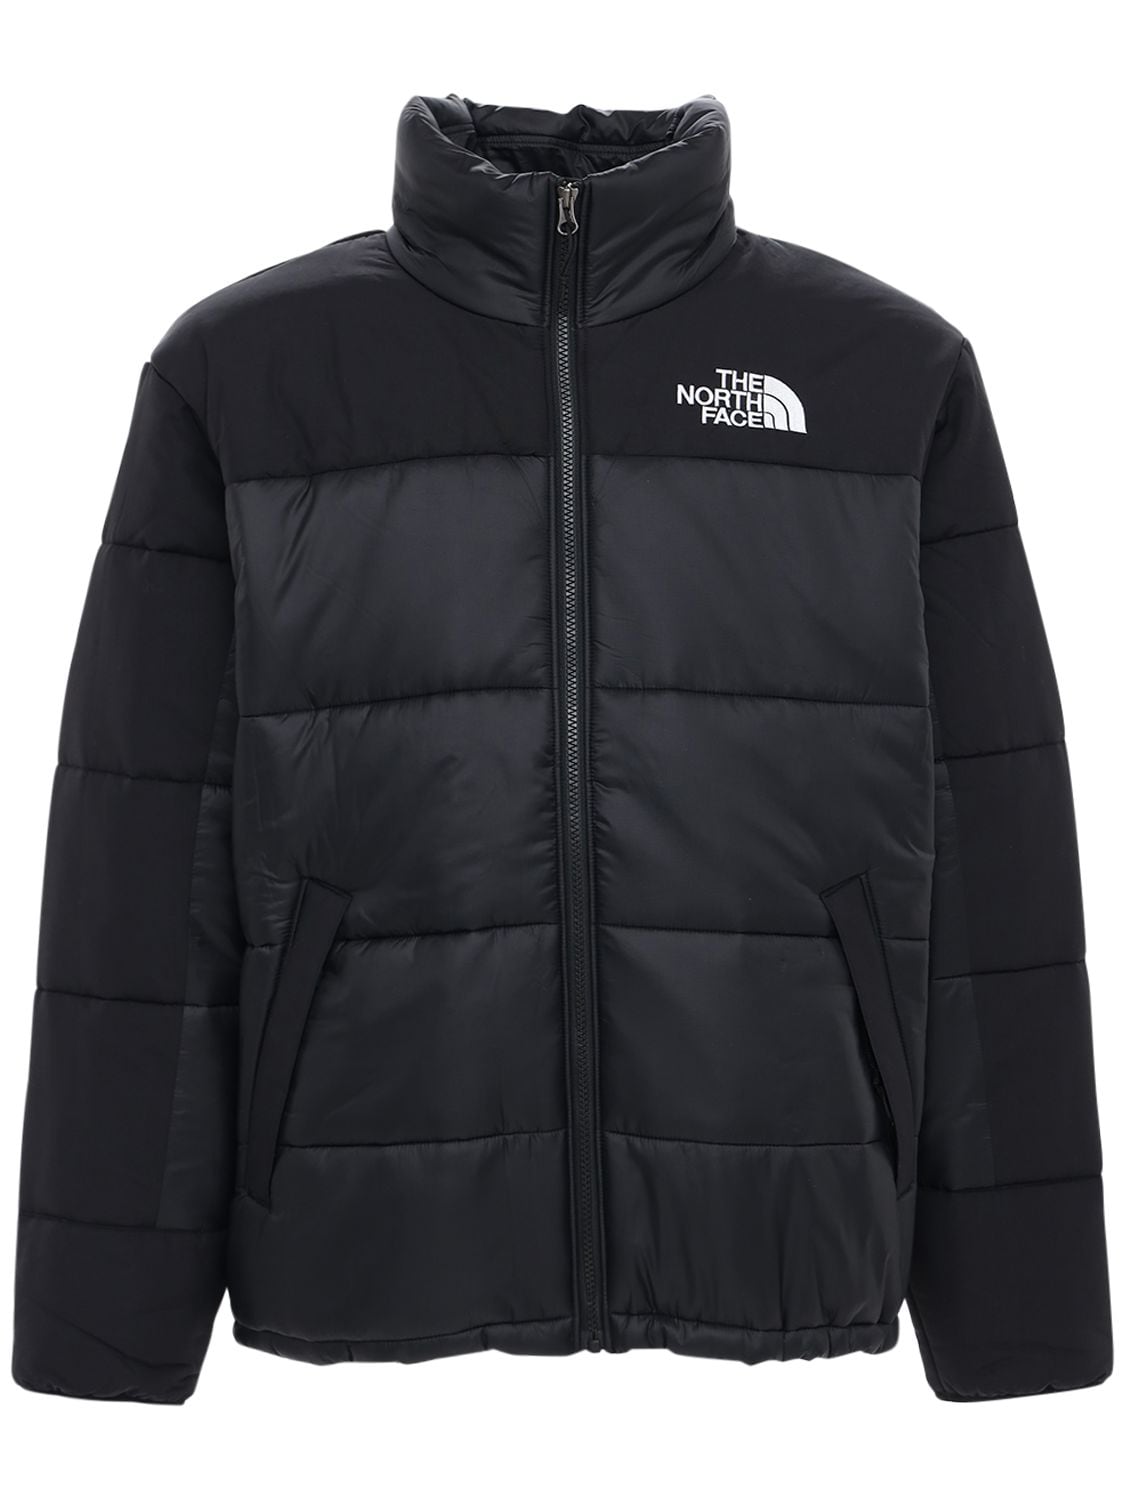 THE NORTH FACE Jackets for Men | ModeSens